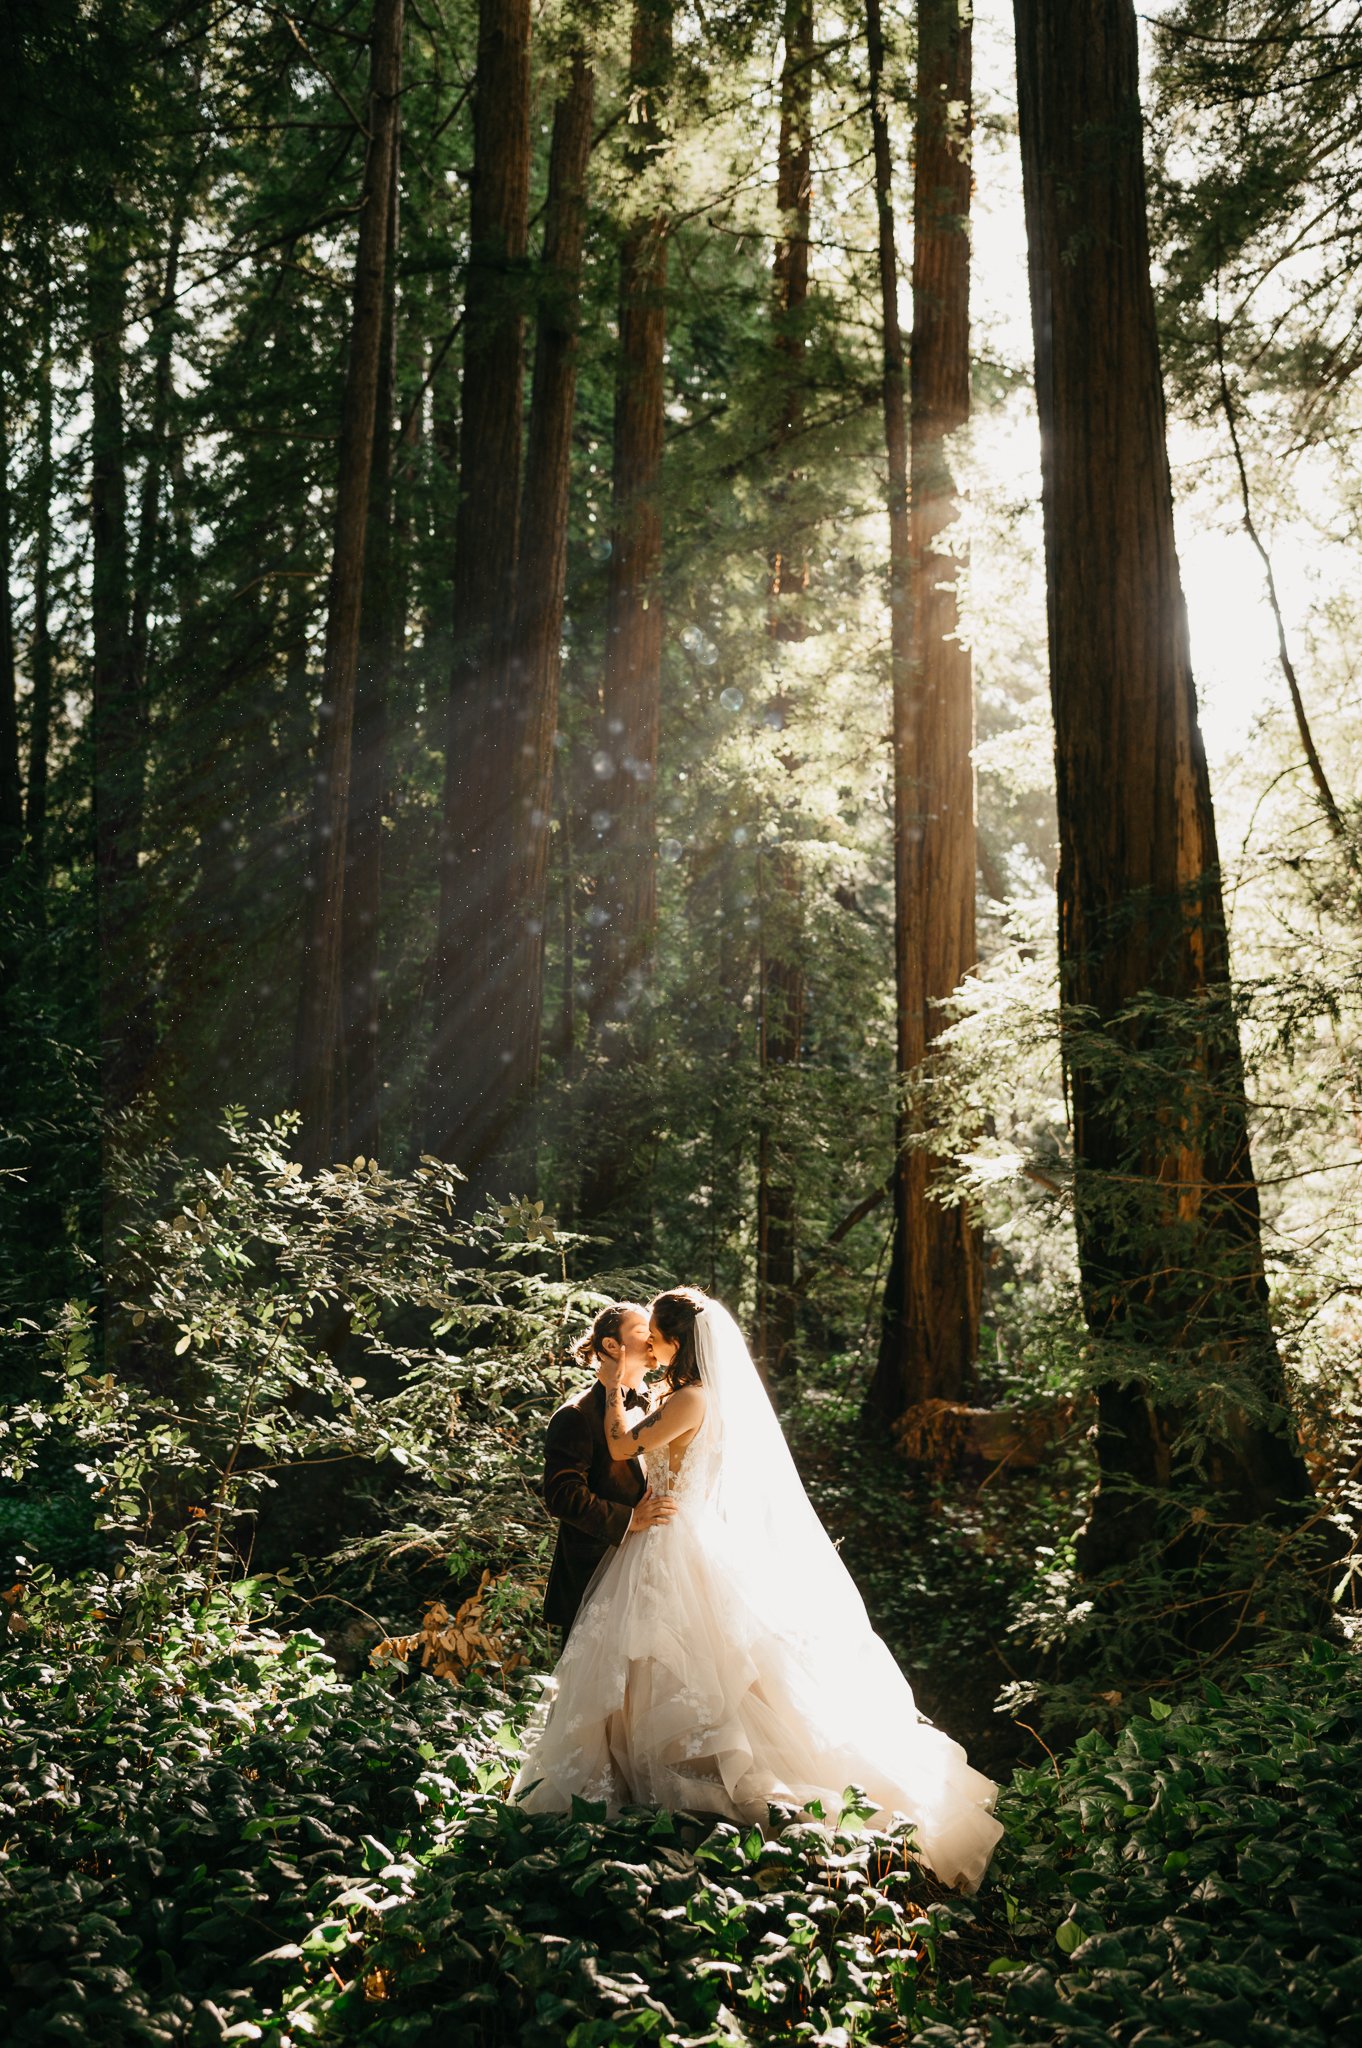 Big Sur Forest wedding bride and groom standing in forest tree sharing a kiss with sun peeking through the trees